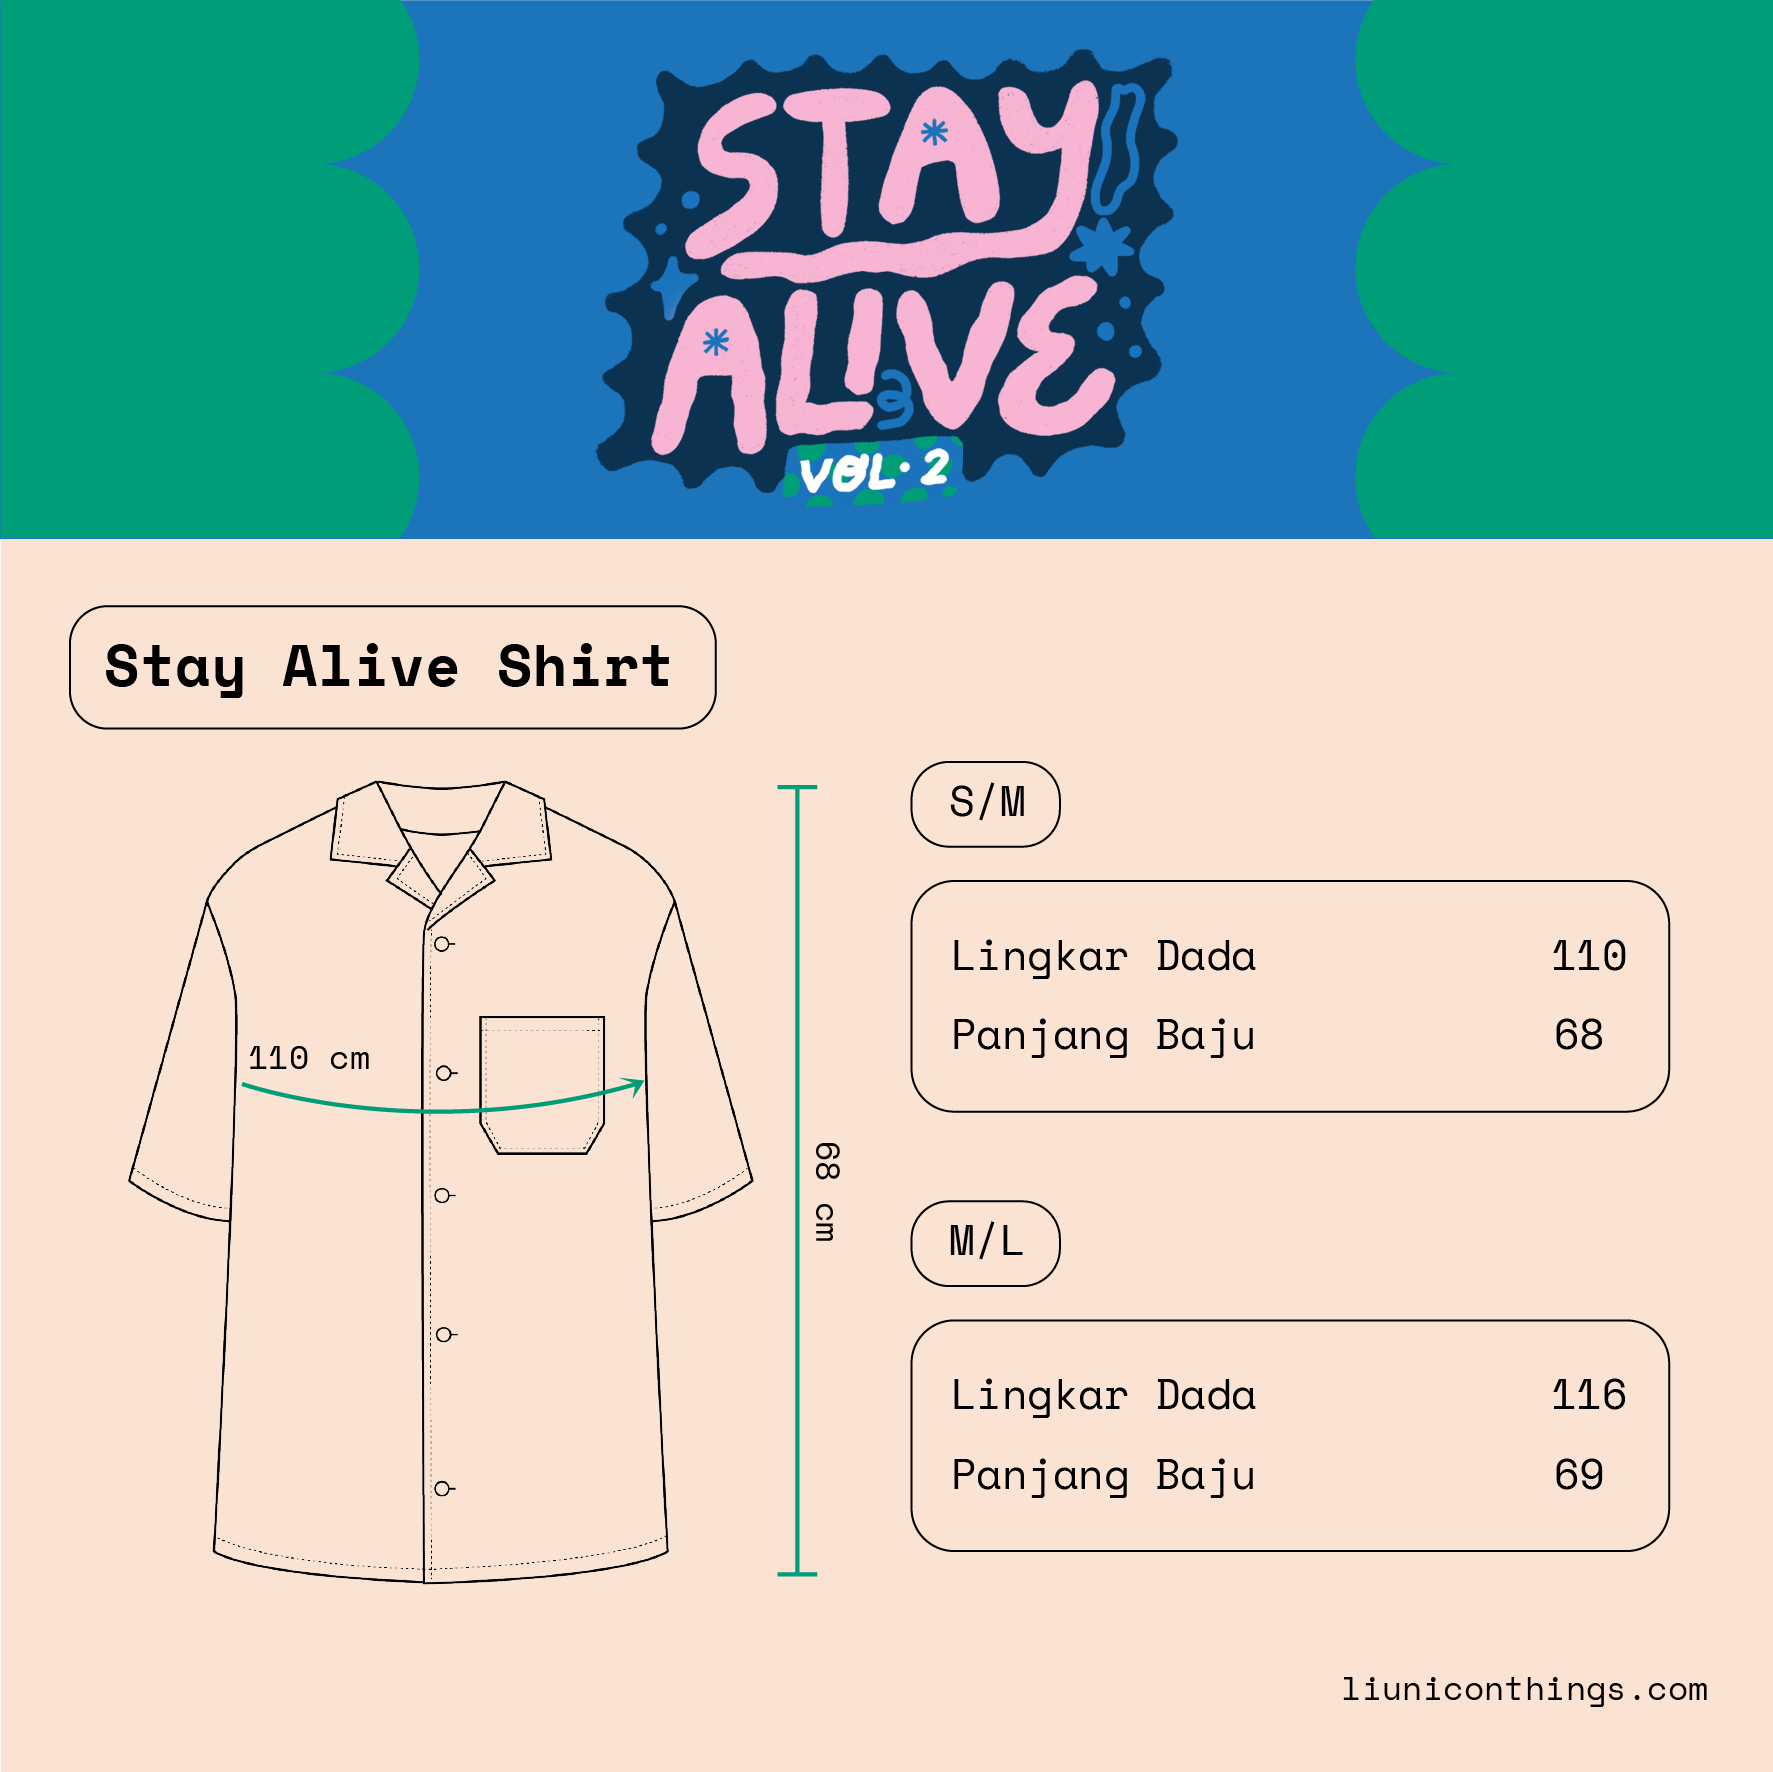 Stay Alive Shirt